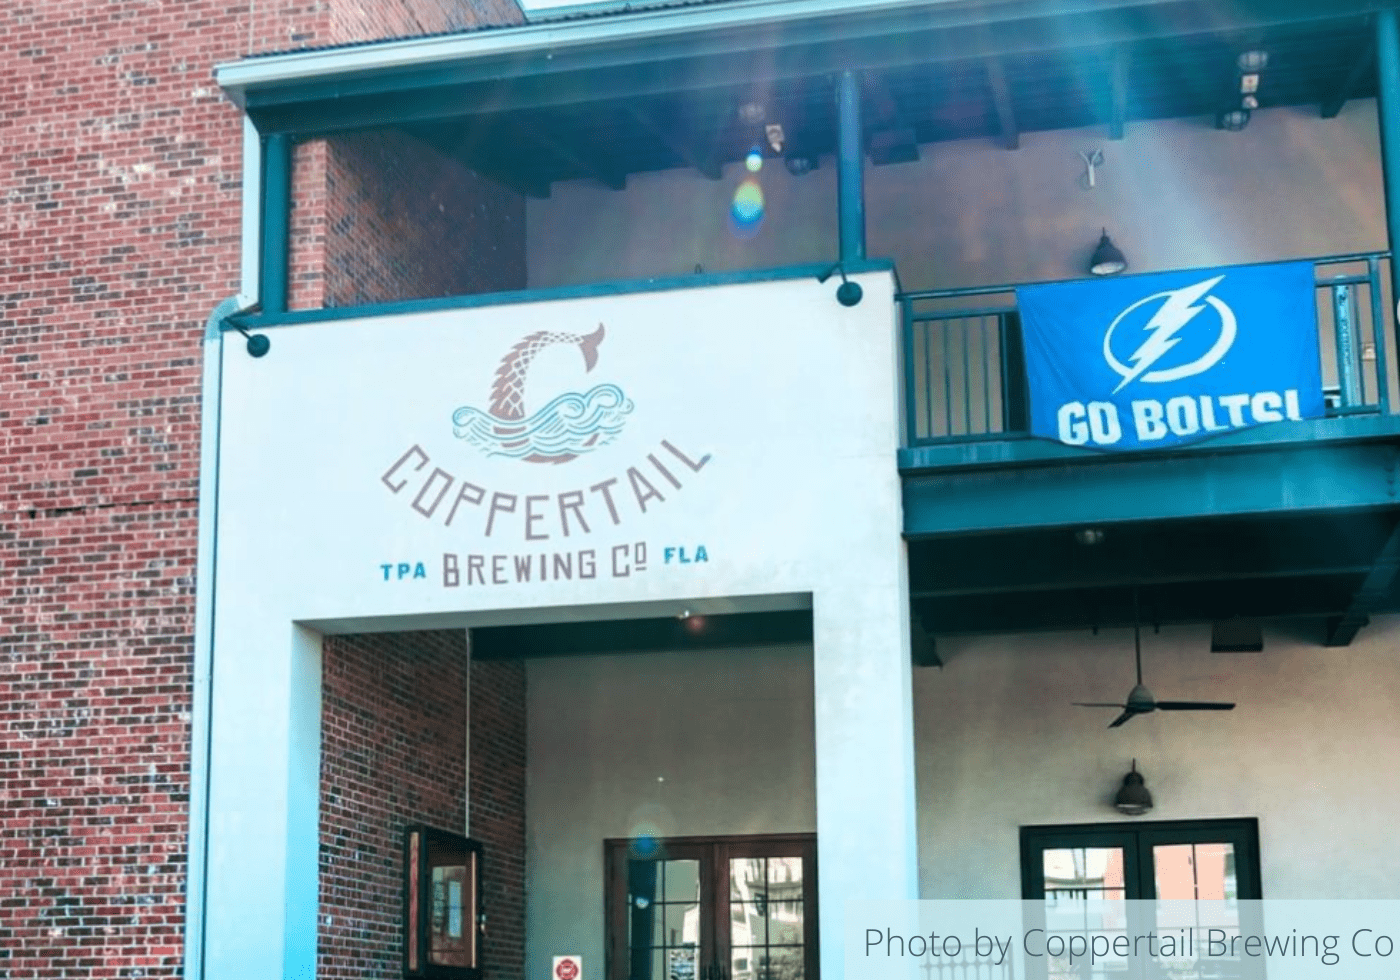 Coppertail Brewing Co. in Tampa, Florida